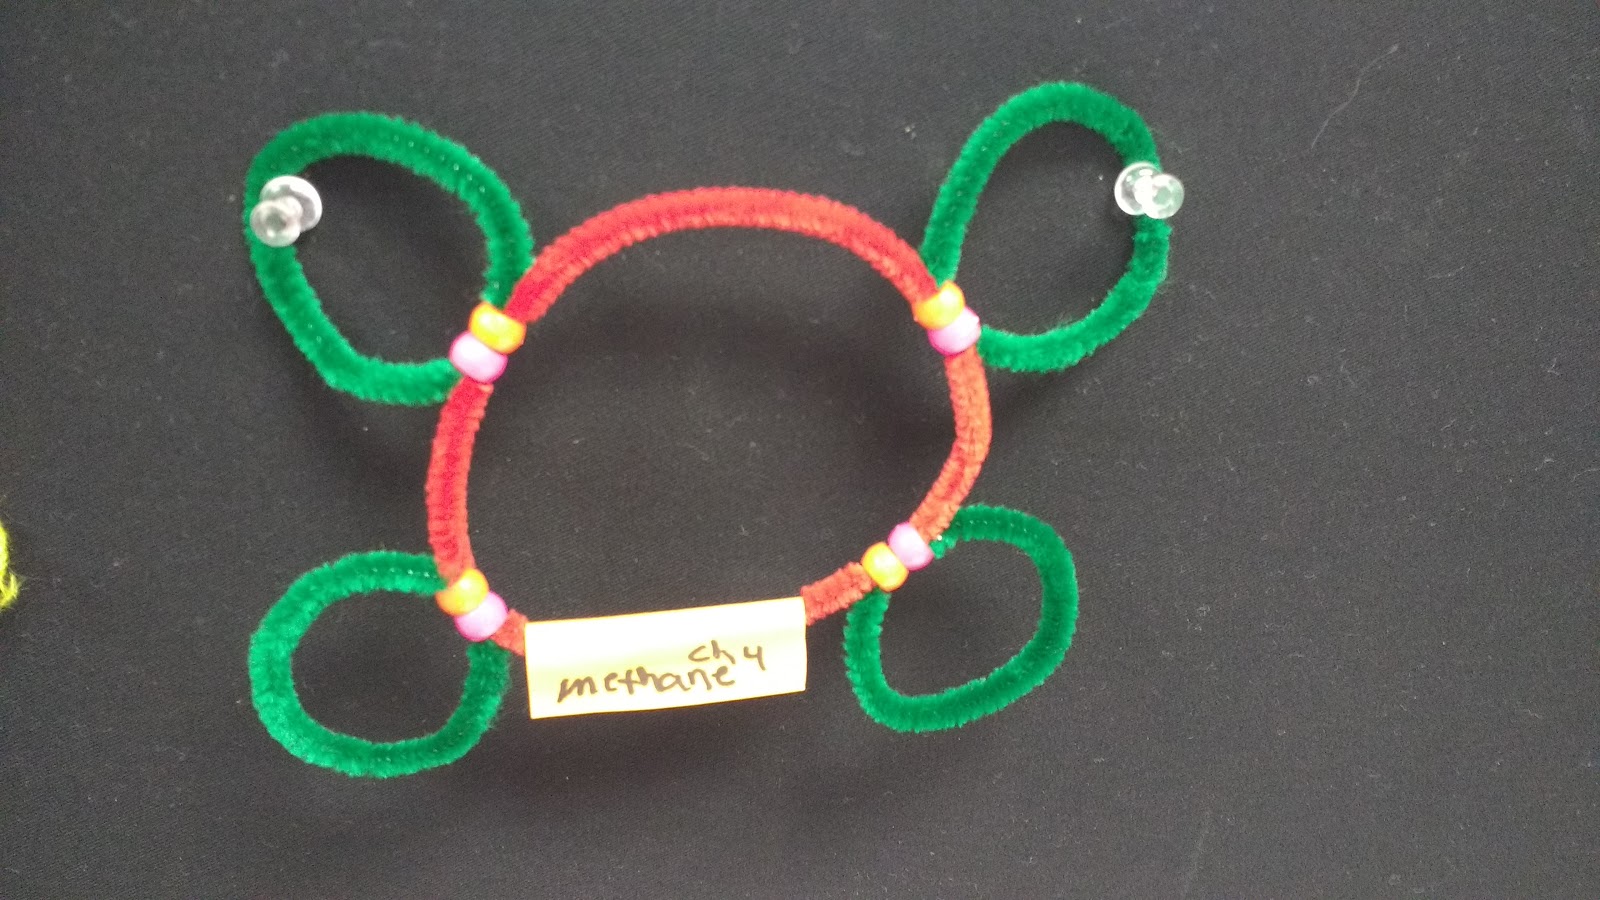 methane molecule made from pipe cleaners and pony beads. 